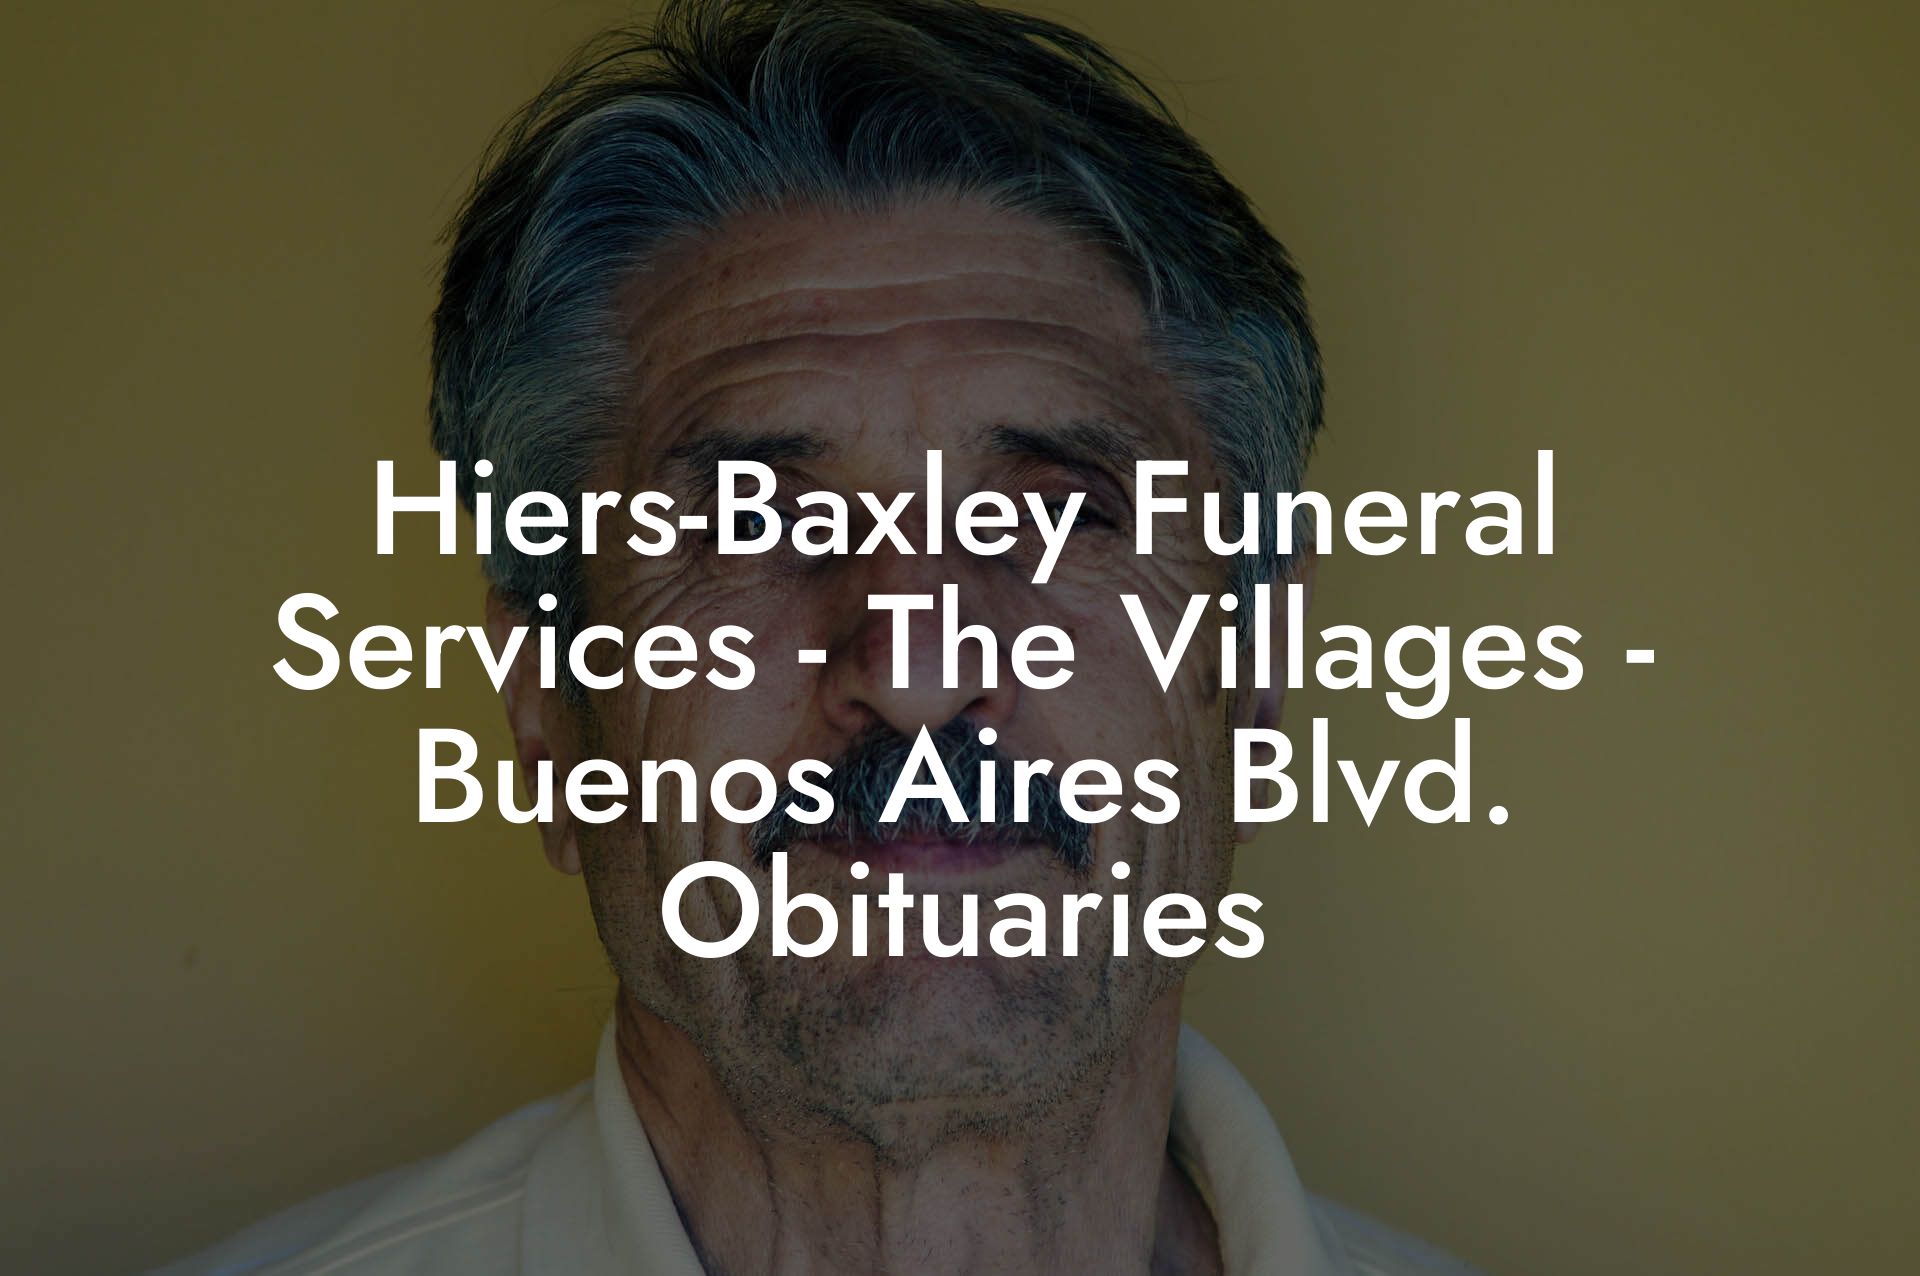 Hiers-Baxley Funeral Services - The Villages - Buenos Aires Blvd. Obituaries